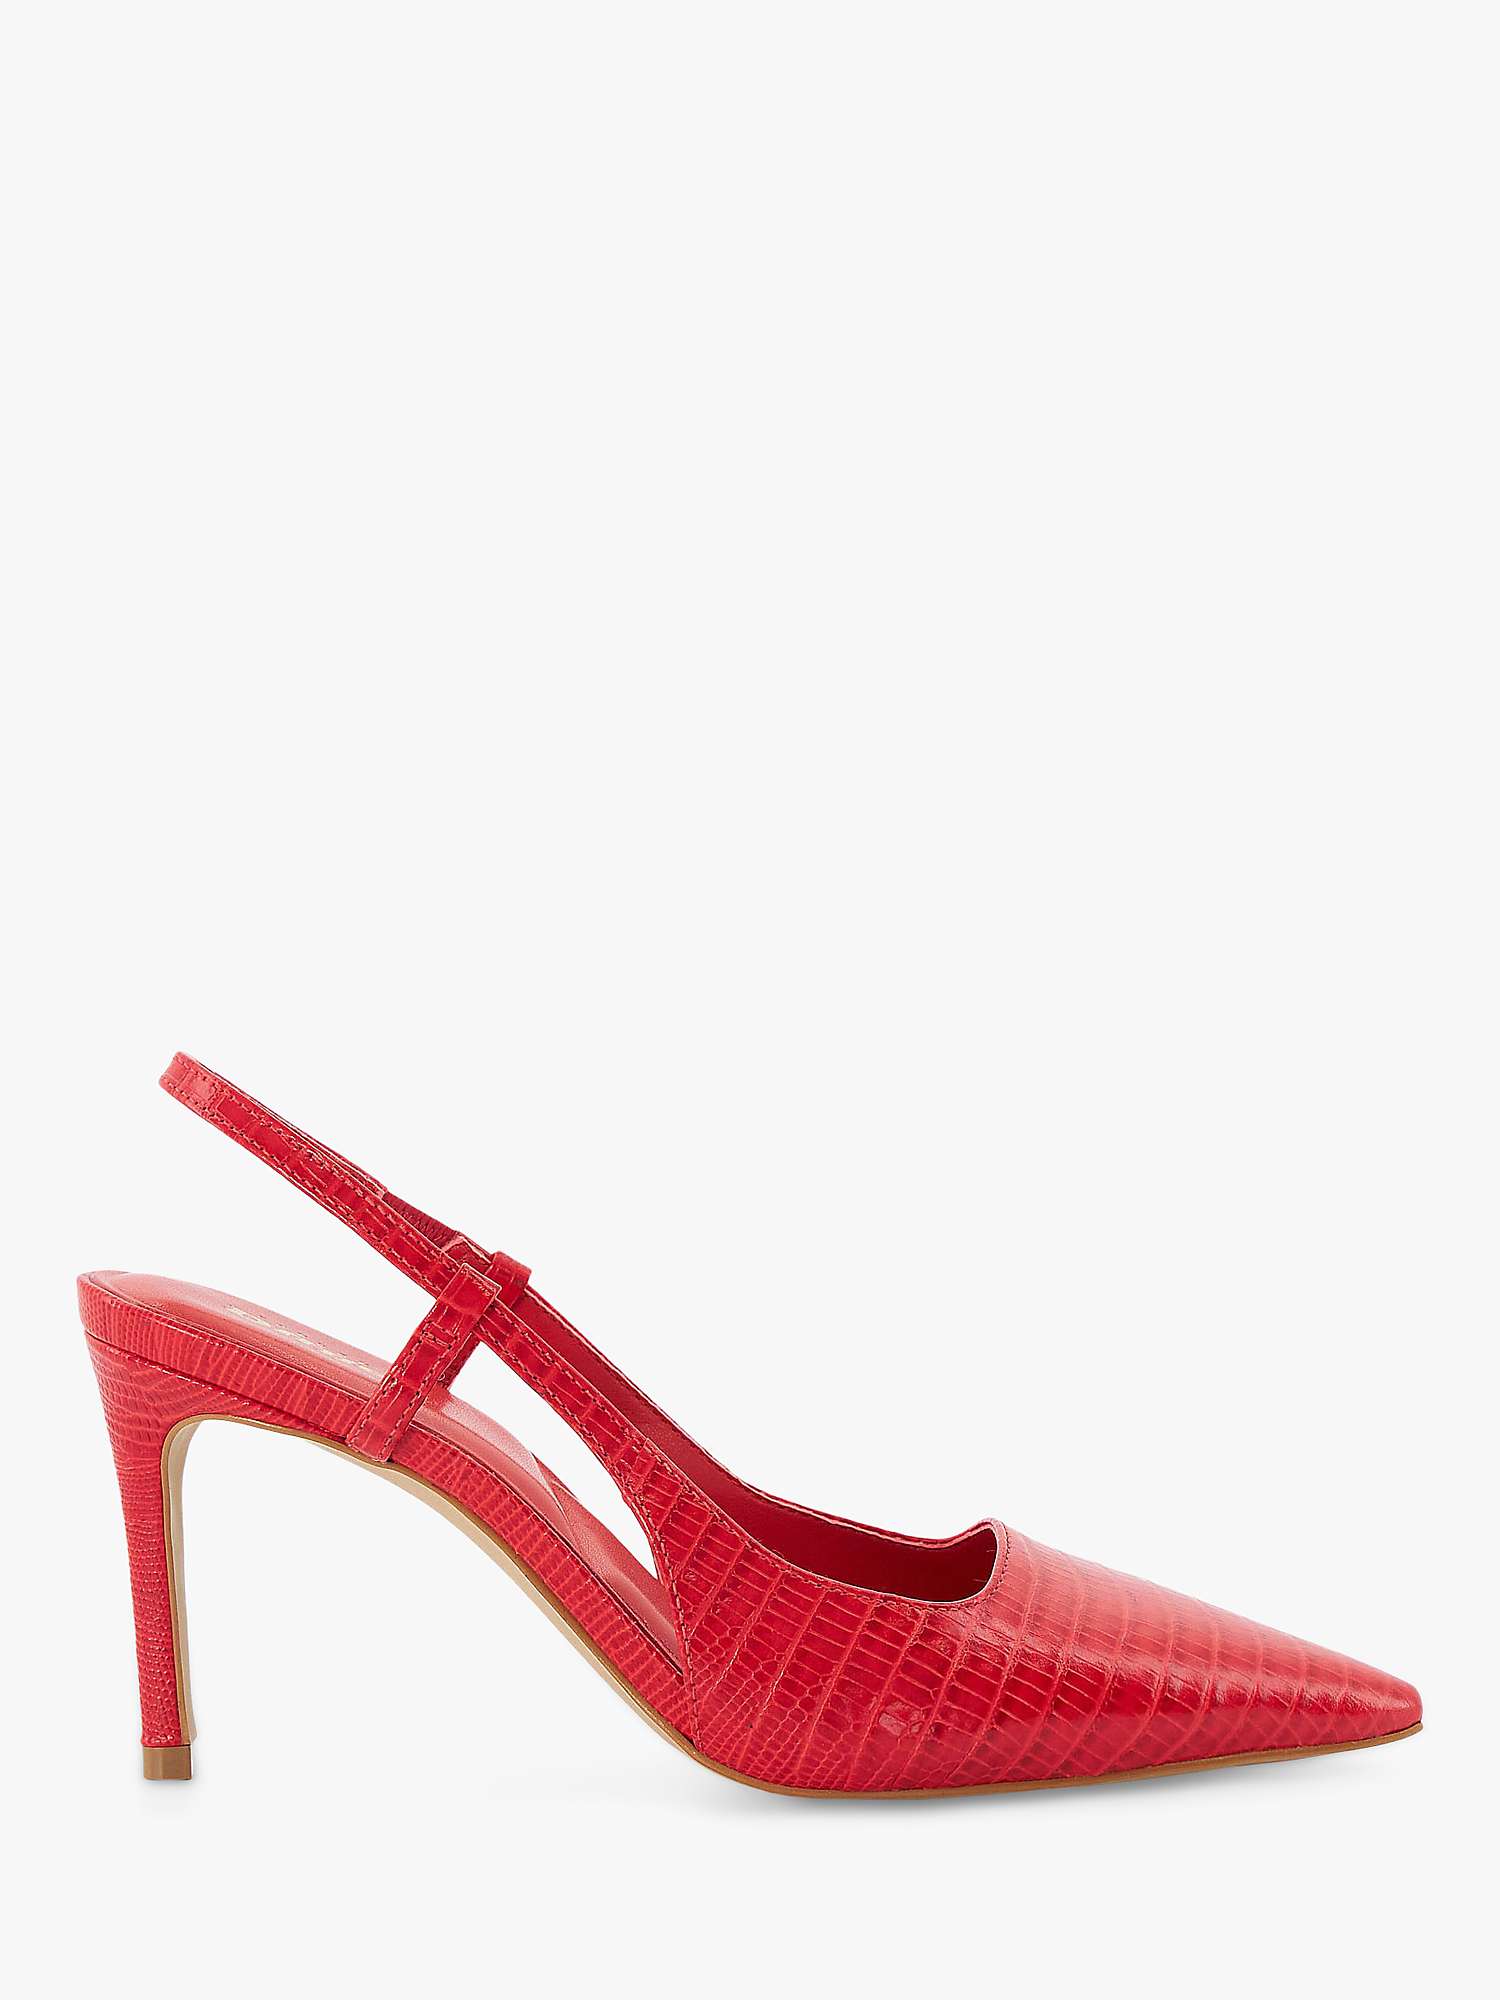 Buy Dune Closer Leather Reptile Print Slingback Court Shoes Online at johnlewis.com